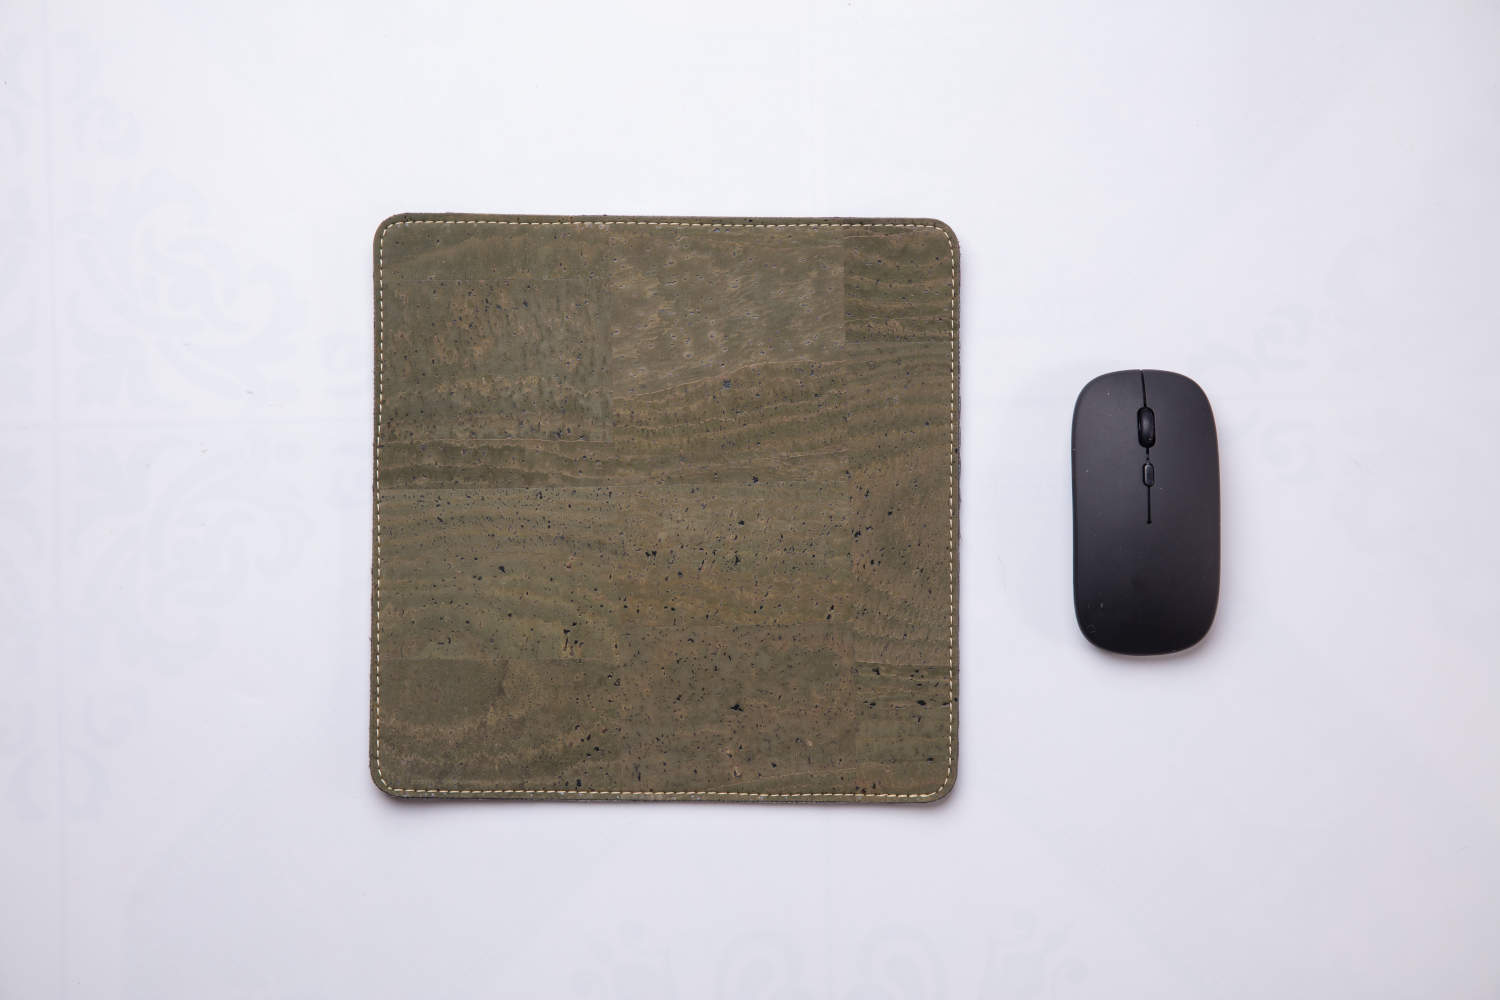 Green travel mousepad next to wireless mouse against white background